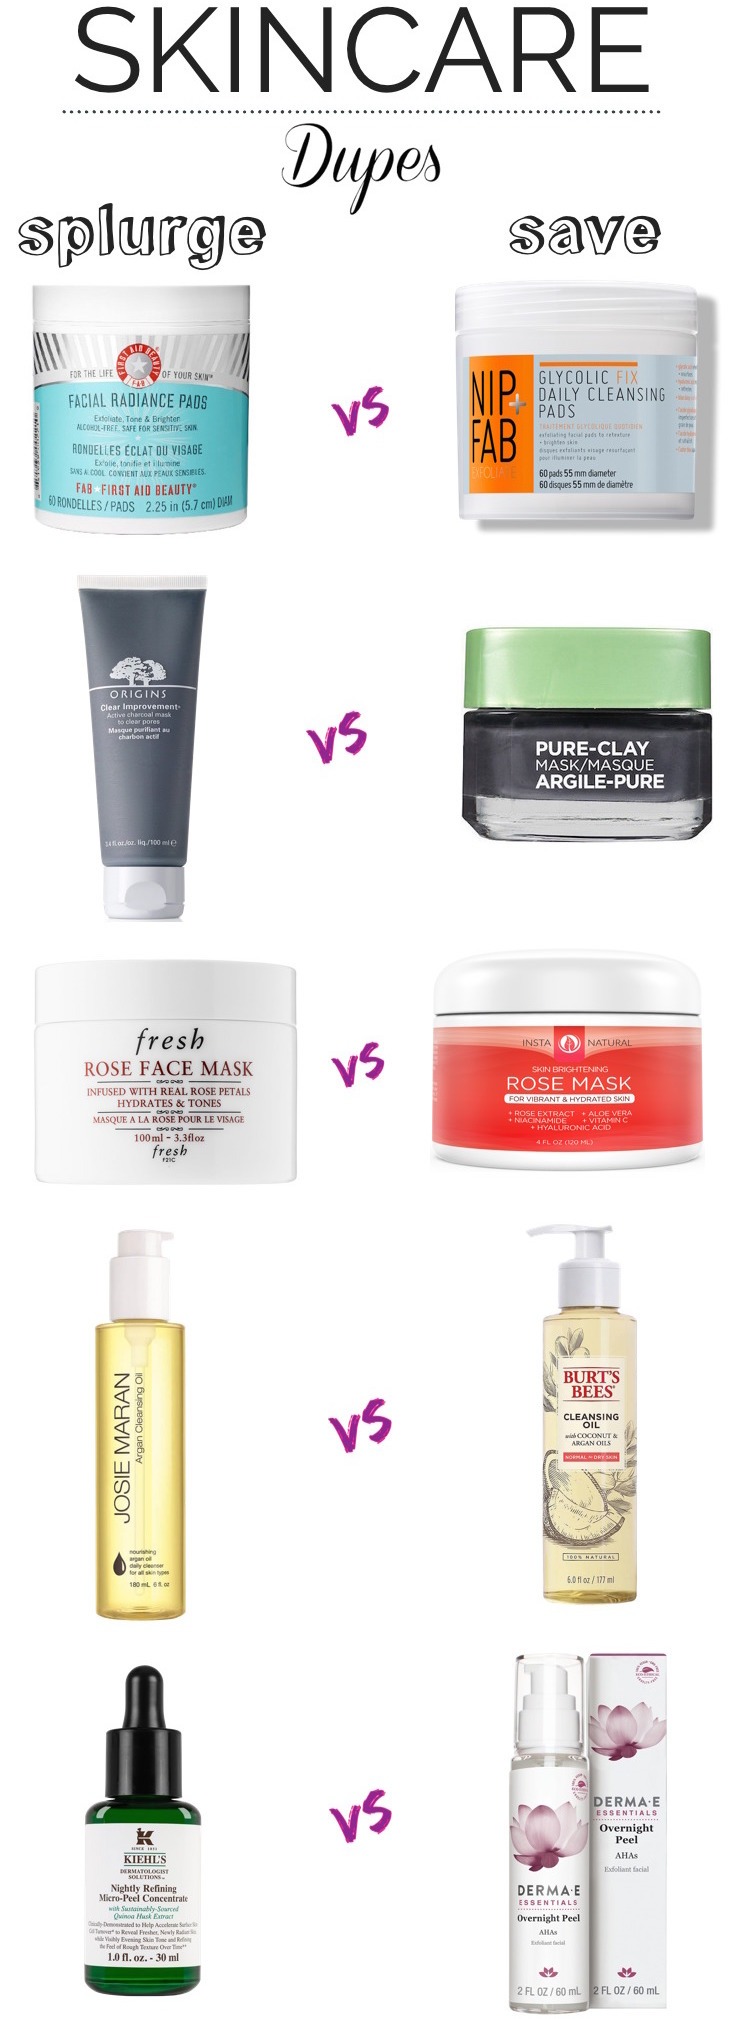 Don't want to drop $110 on a night cream or serum? You don't have to! Here are 10 affordable alternatives for high-end skincare products that work just as well as their pricey counterparts! #drugstoreskincaredupes